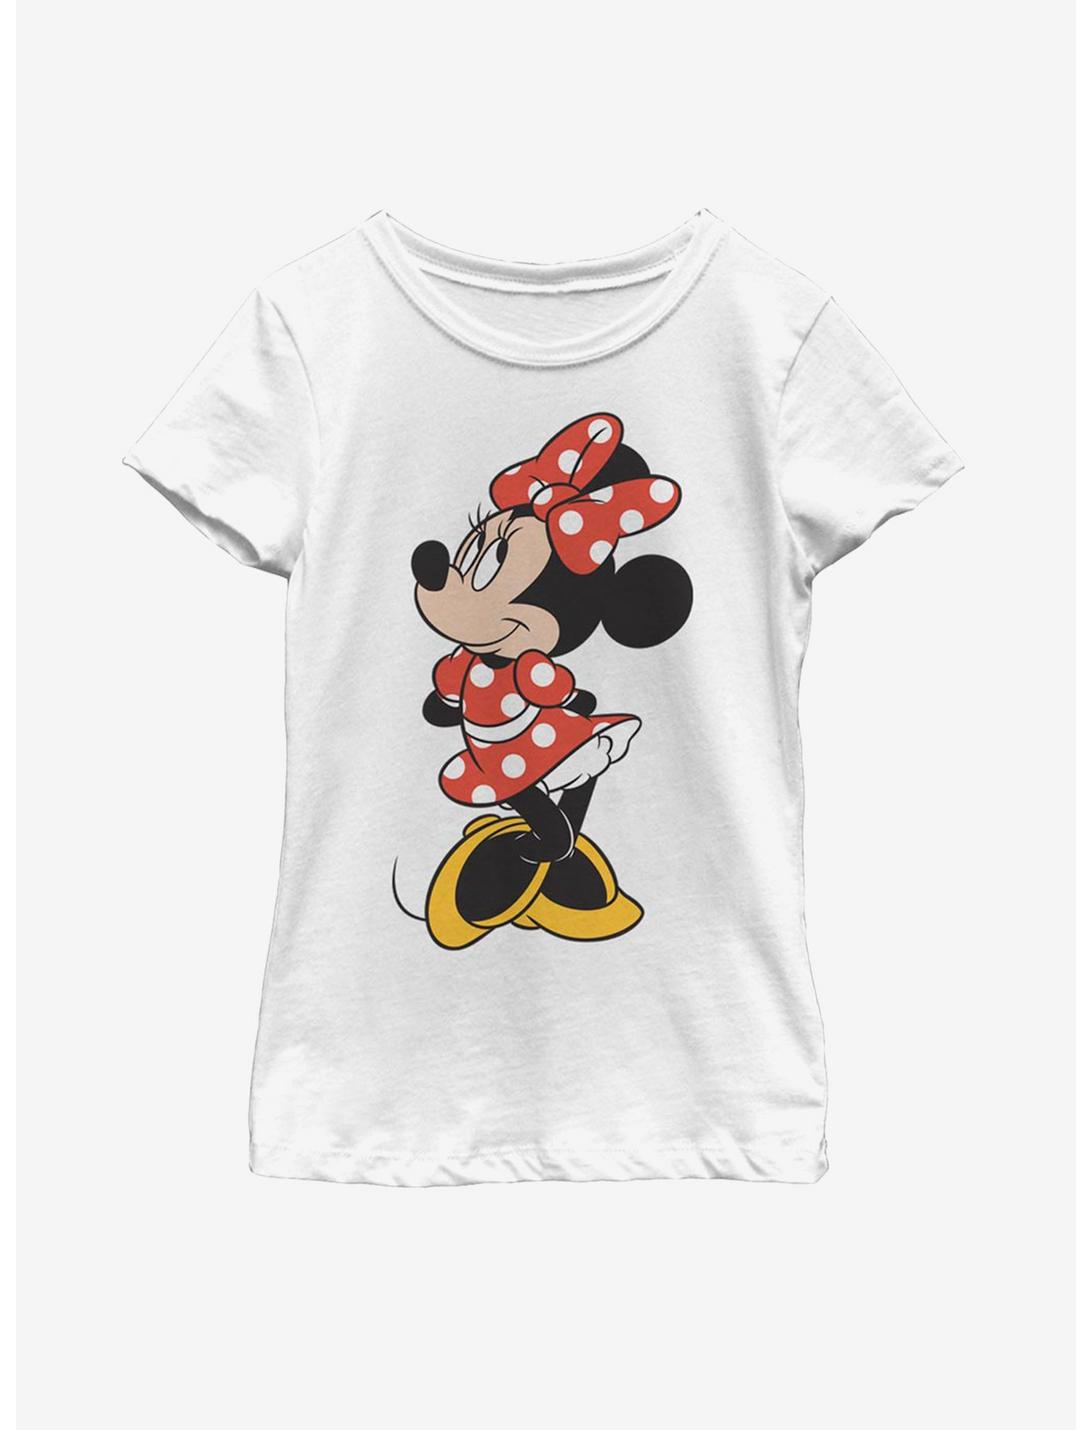 Disney Mickey Mouse Traditional Minnie Youth Girls T-Shirt, WHITE, hi-res